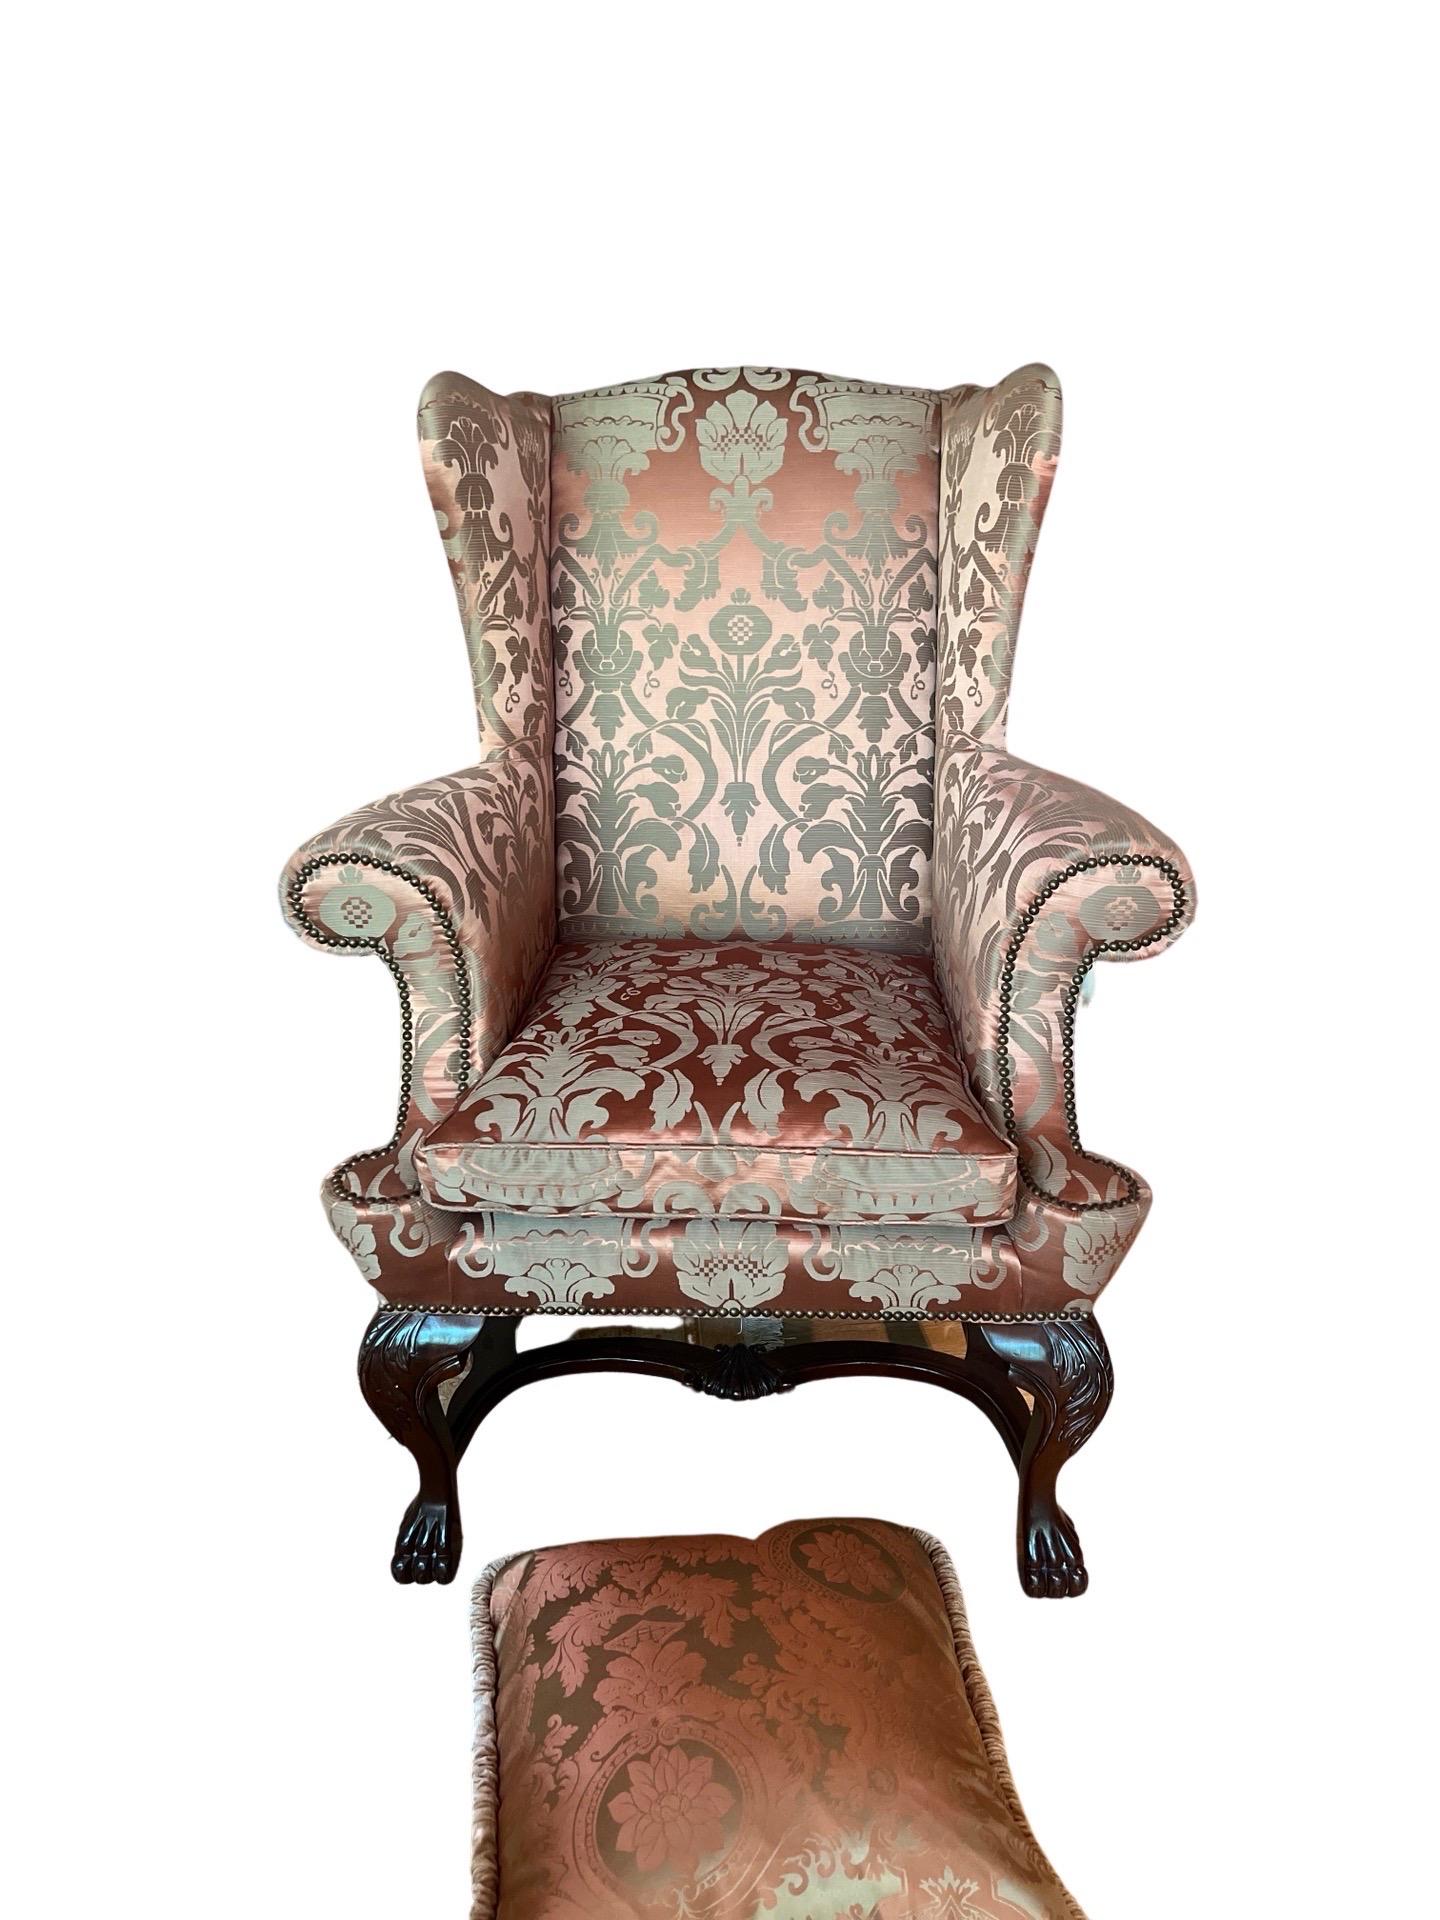 An incredibly fine Baker Furniture Company George II style wingback chair. The chair has been upholstered with custom designer upholstery. The carved paw feet, nailhead trim, rolled arms and matching pillow make this a stunning chair for any home!